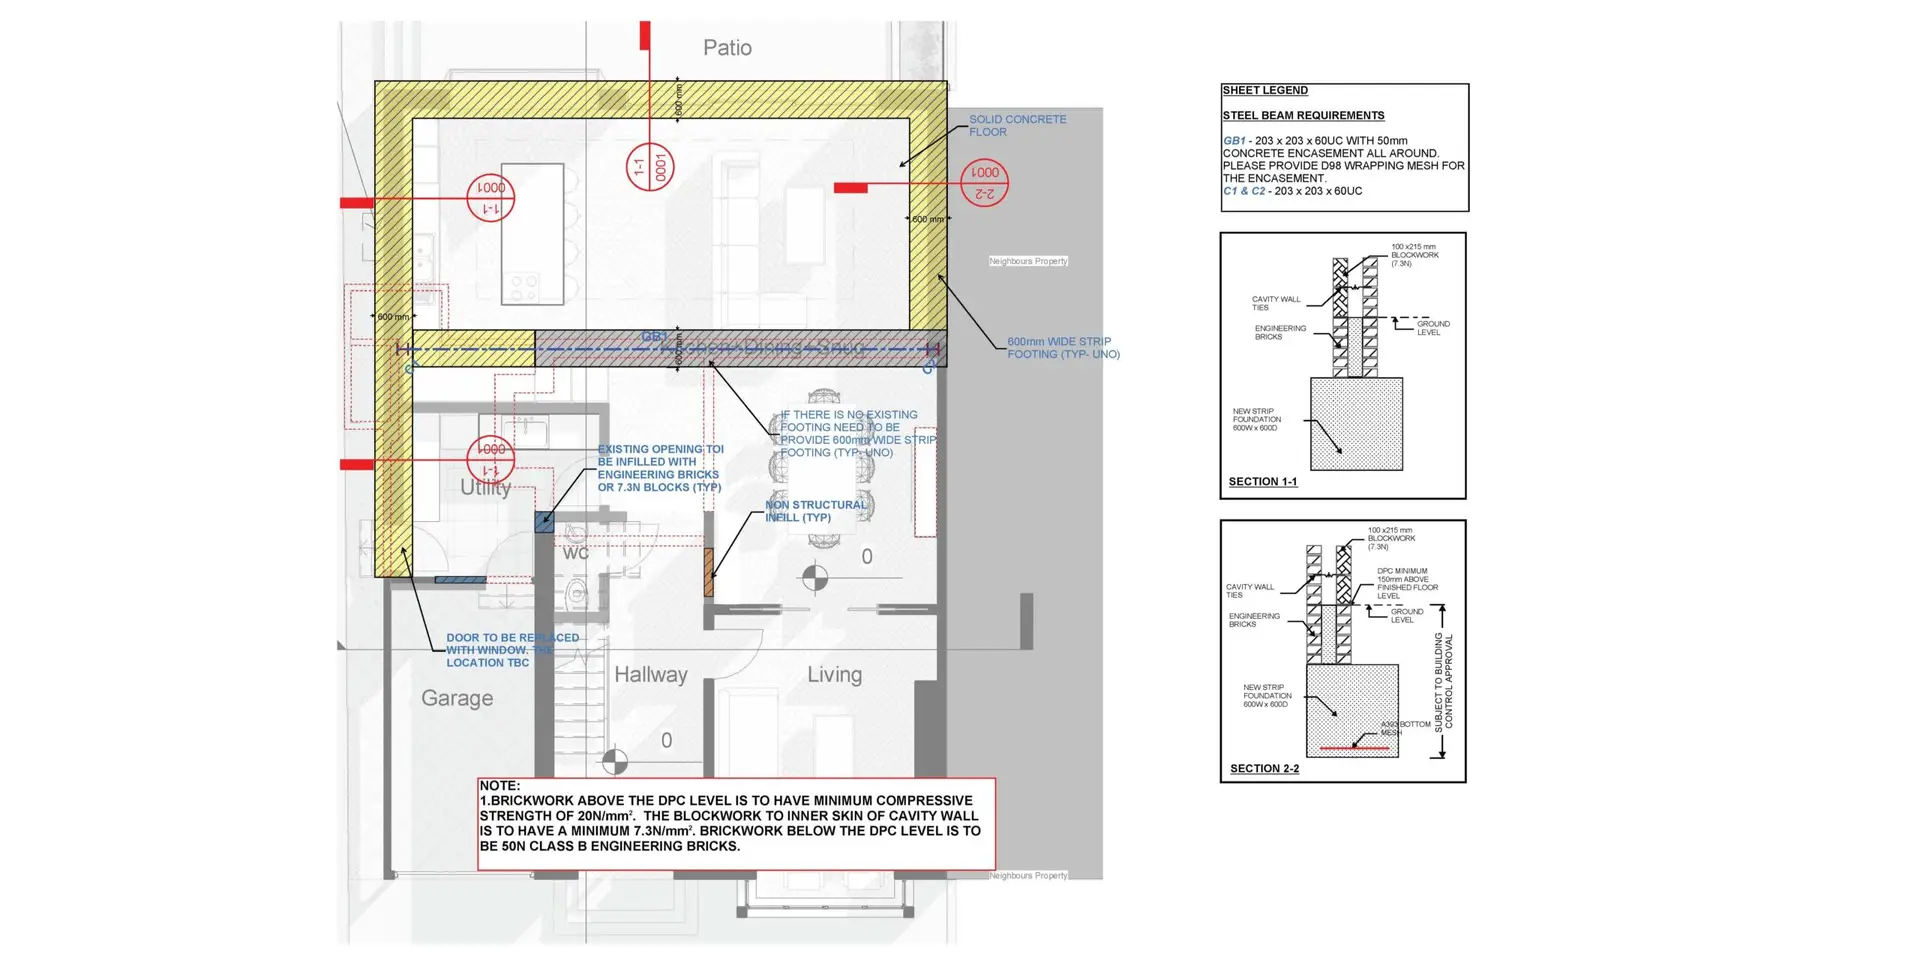 Structural & Building Regulation Drawings